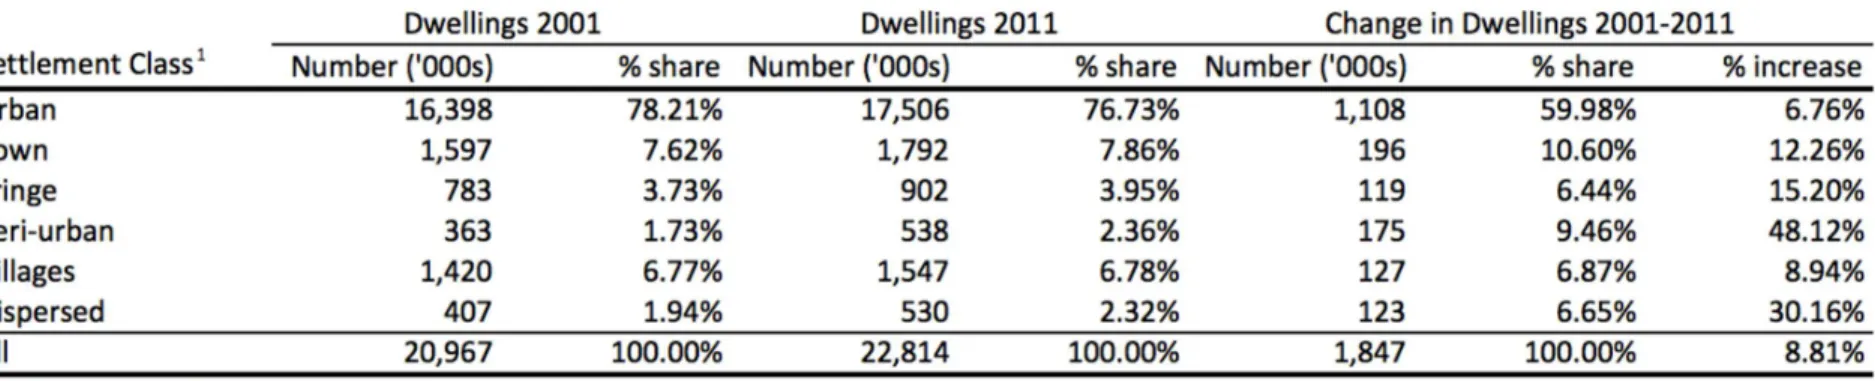 Table 1: Increase in dwellings by settlement class, England, 2001-2011 